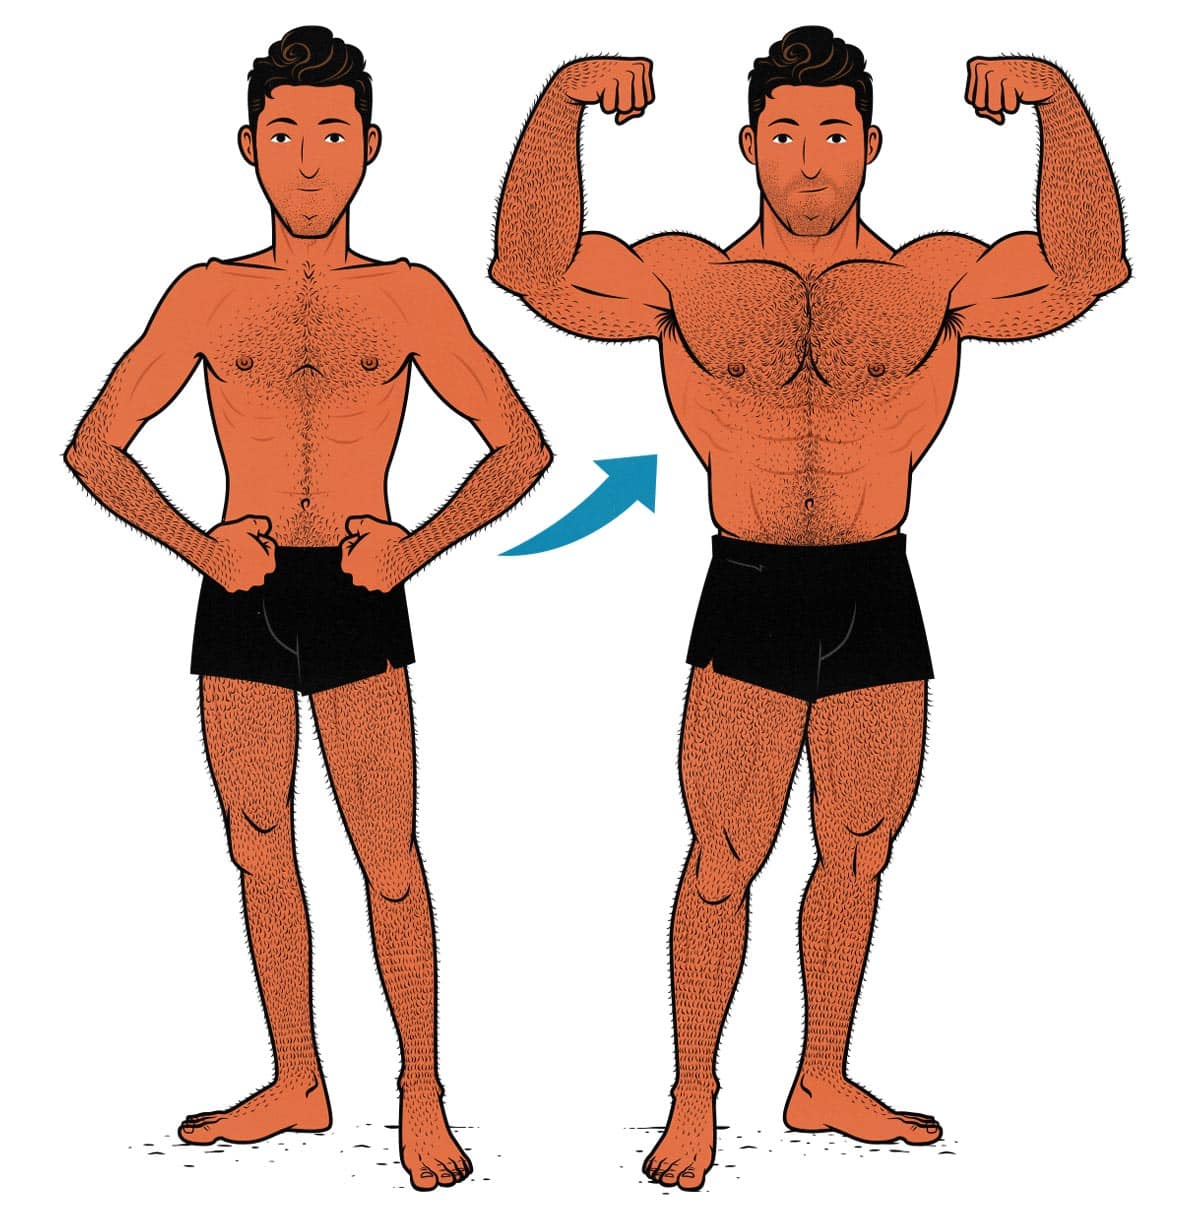 A skinny guy bulking up and becoming muscular, illustrated by Shane Duquette for Bony to Beastly.